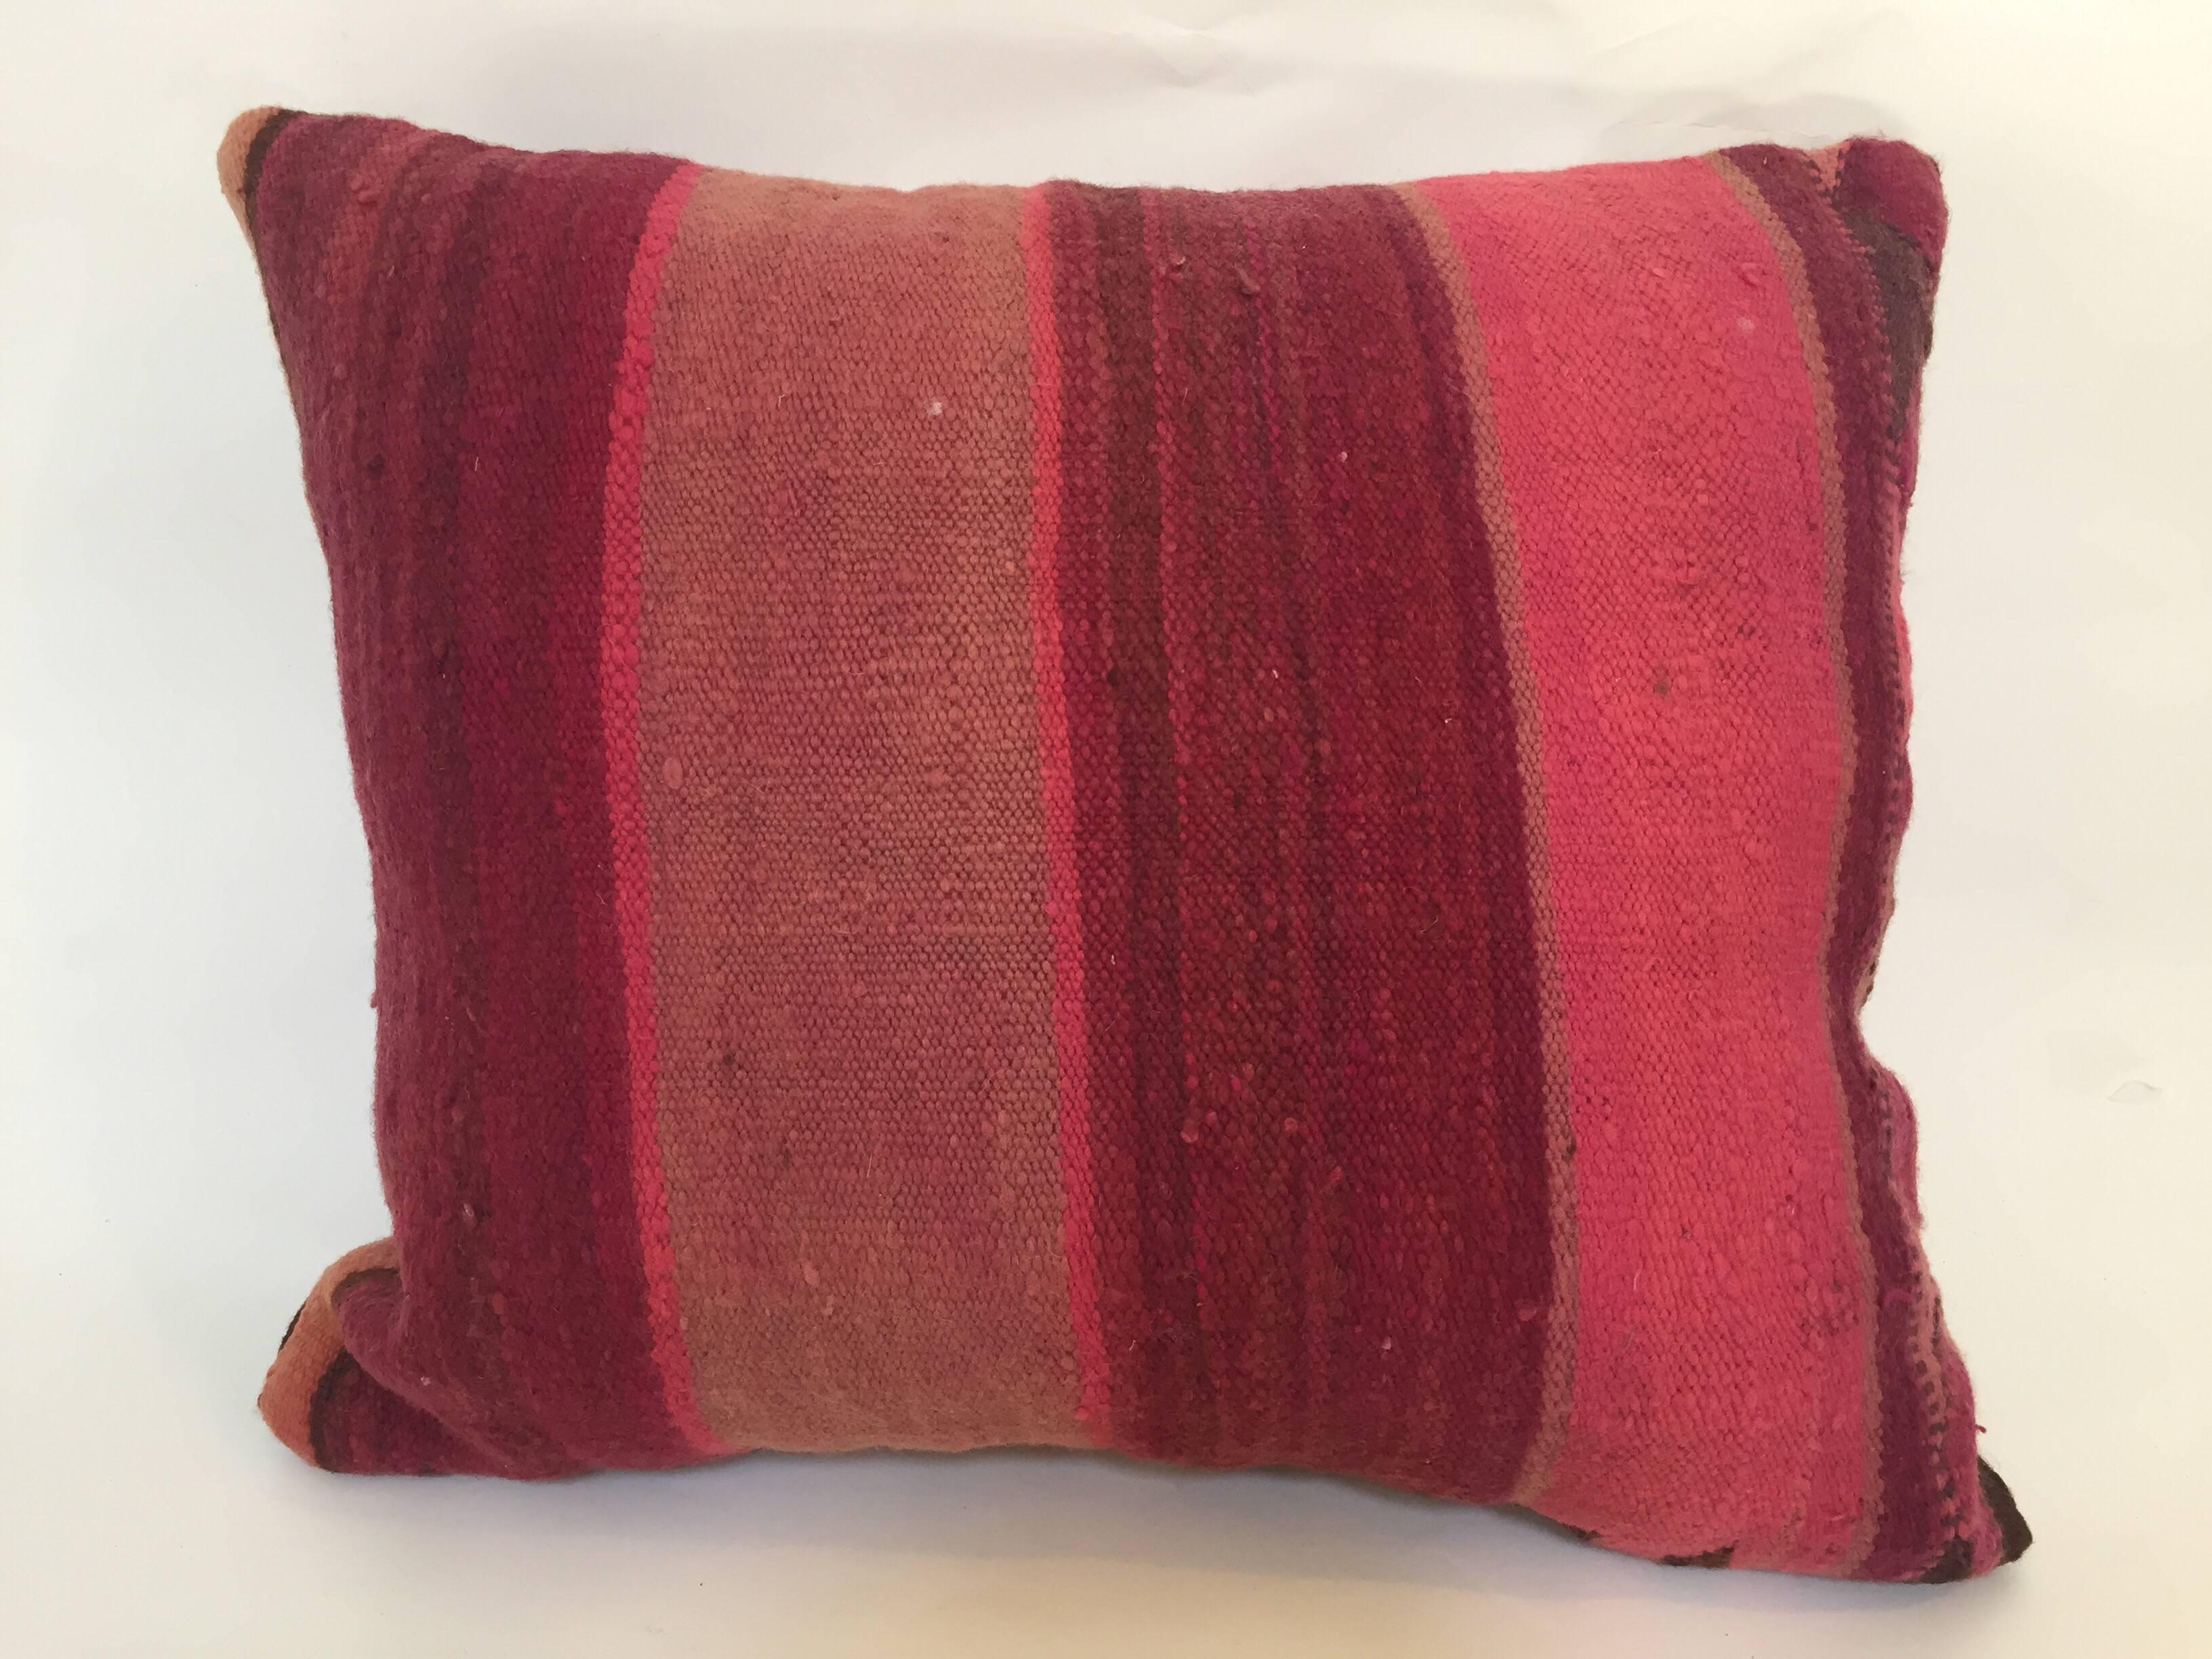 Custom Berber pillow cut from a vintage hand woven wool Moroccan tribal flat-weave Kilim tribal rug.
Handwoven by the Berber women from the Atlas Mountains of Morocco. 
Great handcrafted textile with earth tone colors large stripes in purple,